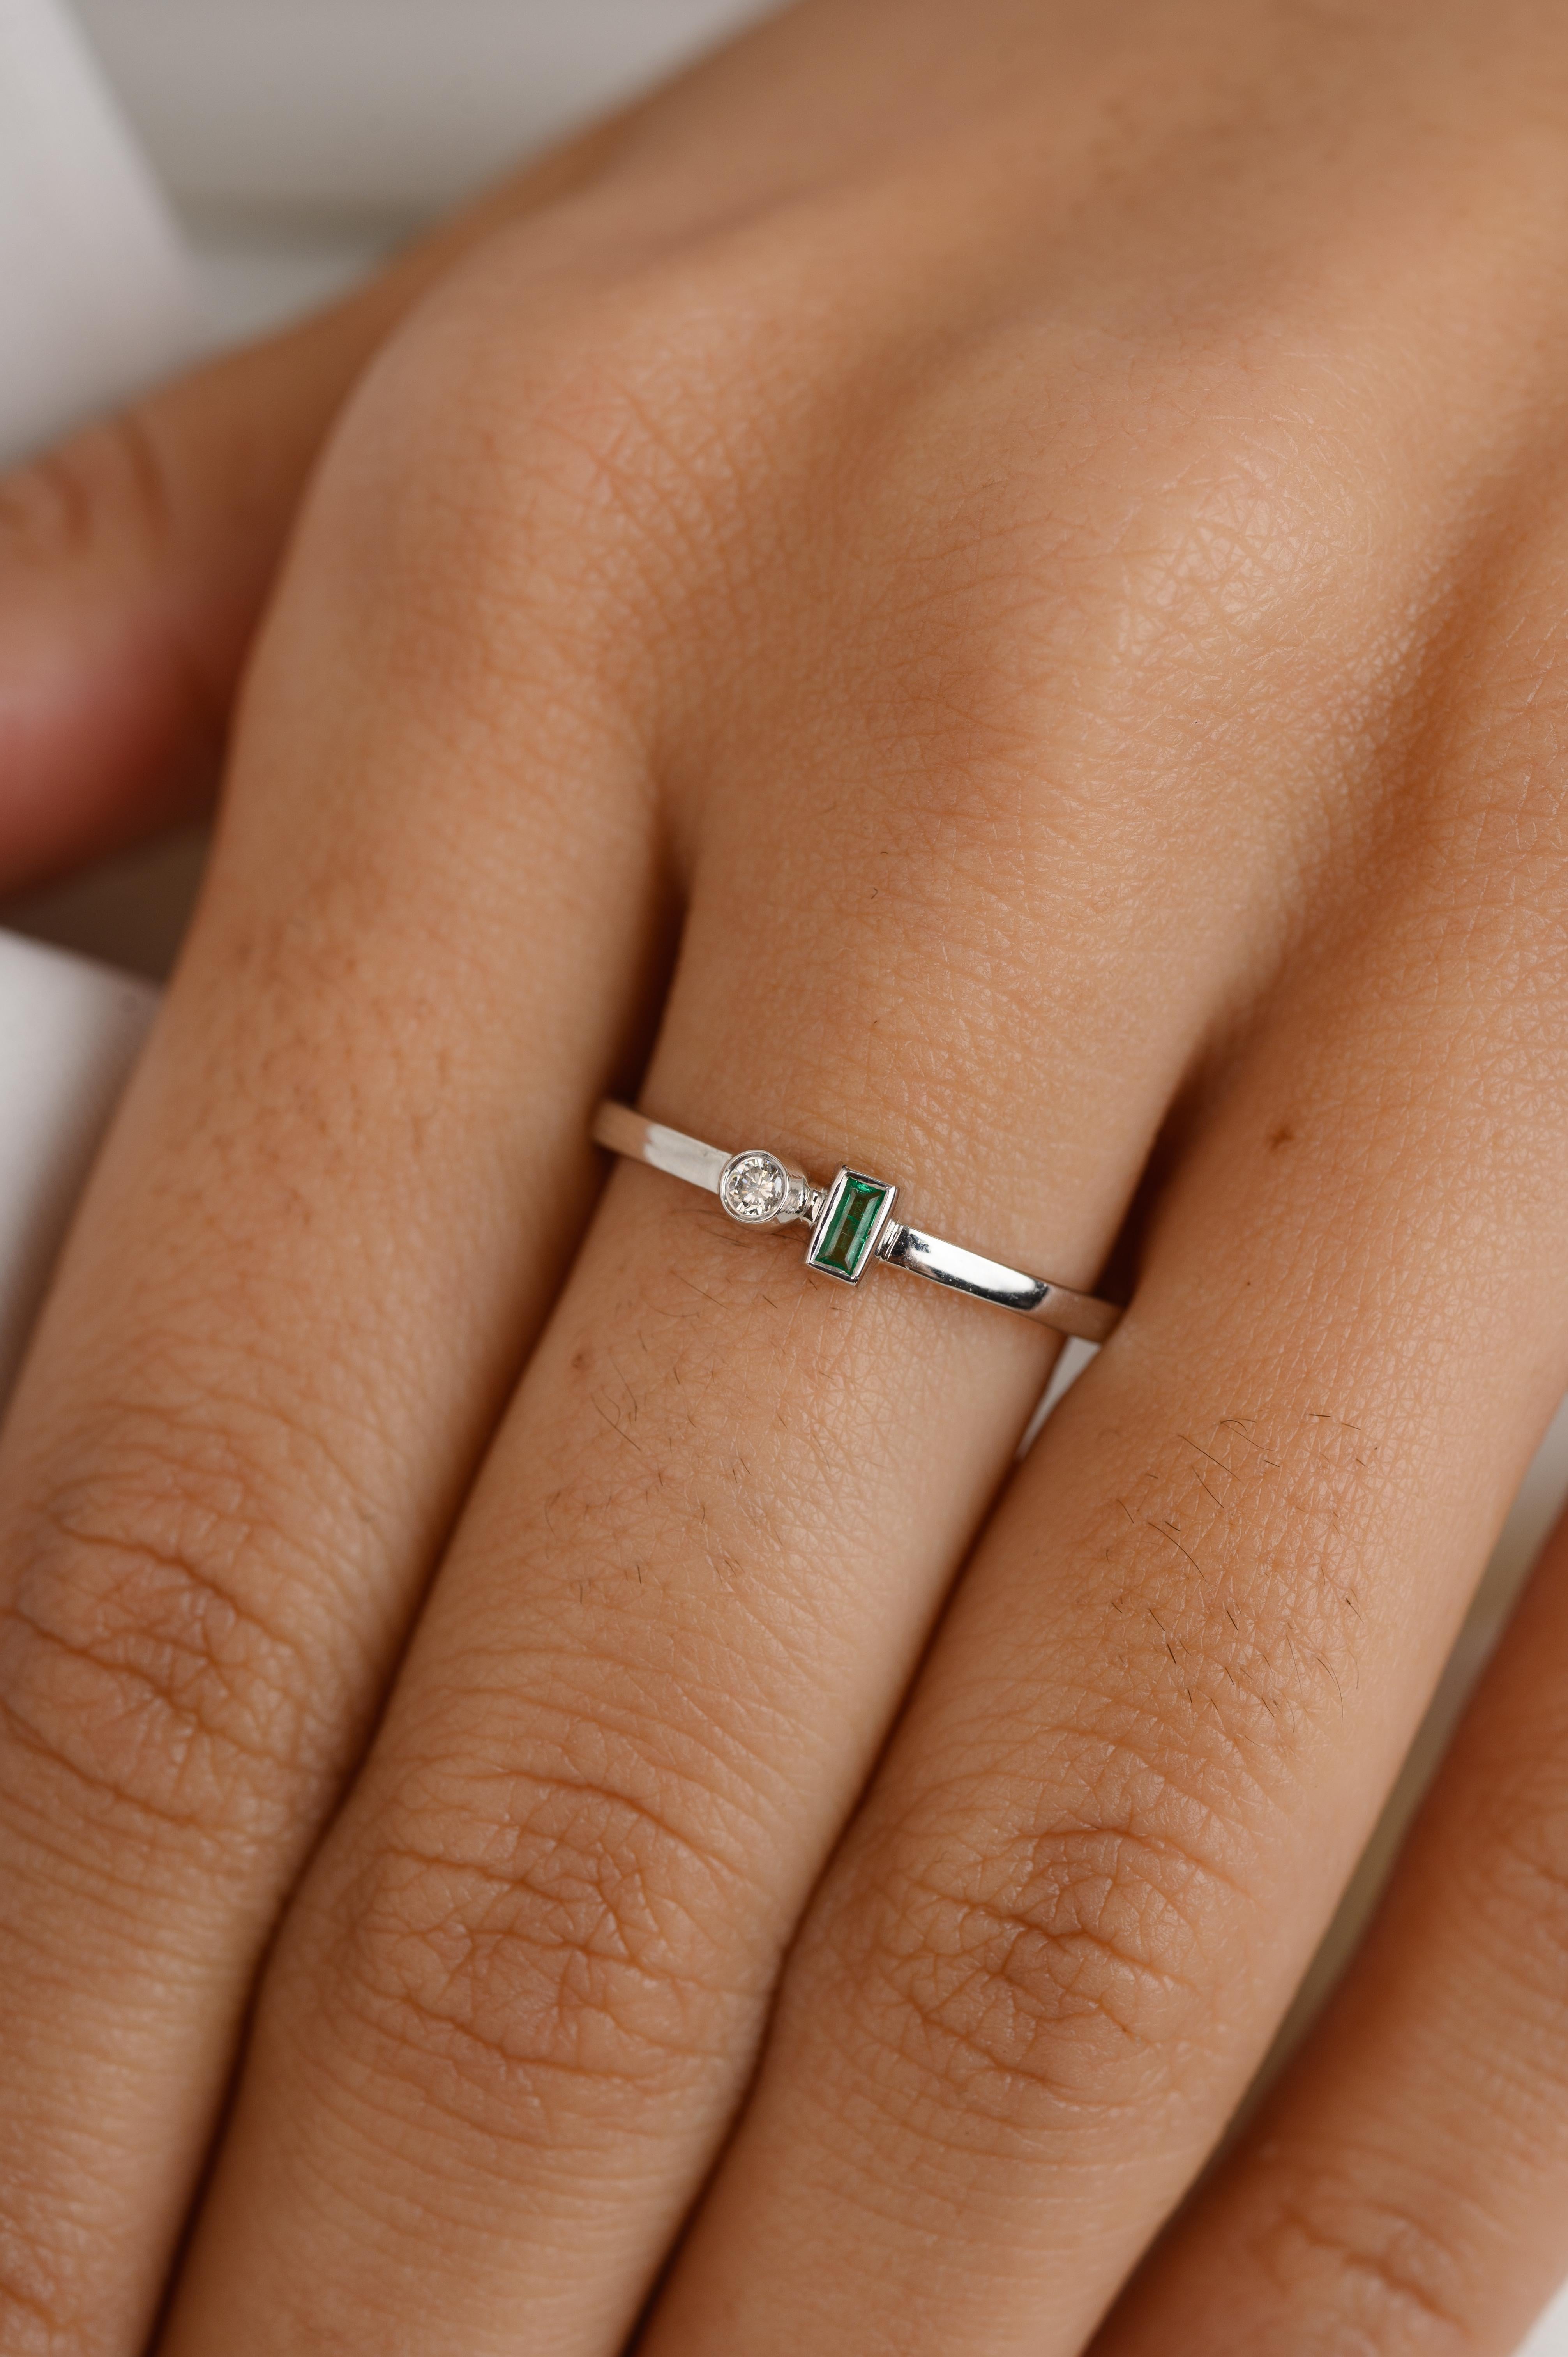 For Sale:  14k Solid White Gold Tiny Tow Stone Emerald and Diamond Ring Gift 4